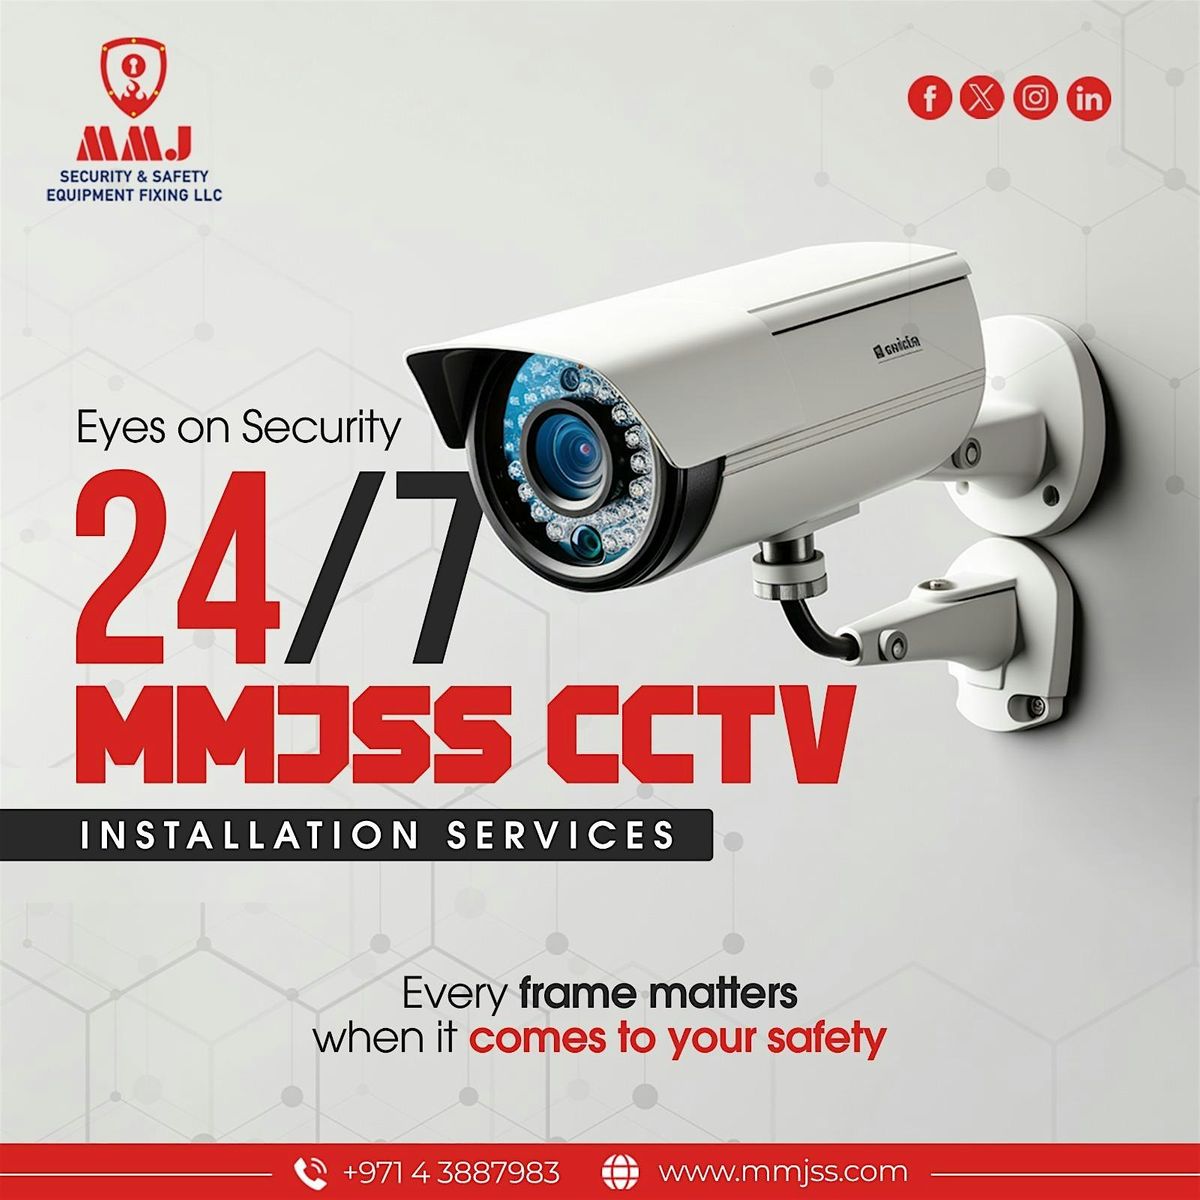 Enhancing Security with Professional CCTV Installation in Dubai: MMJSS